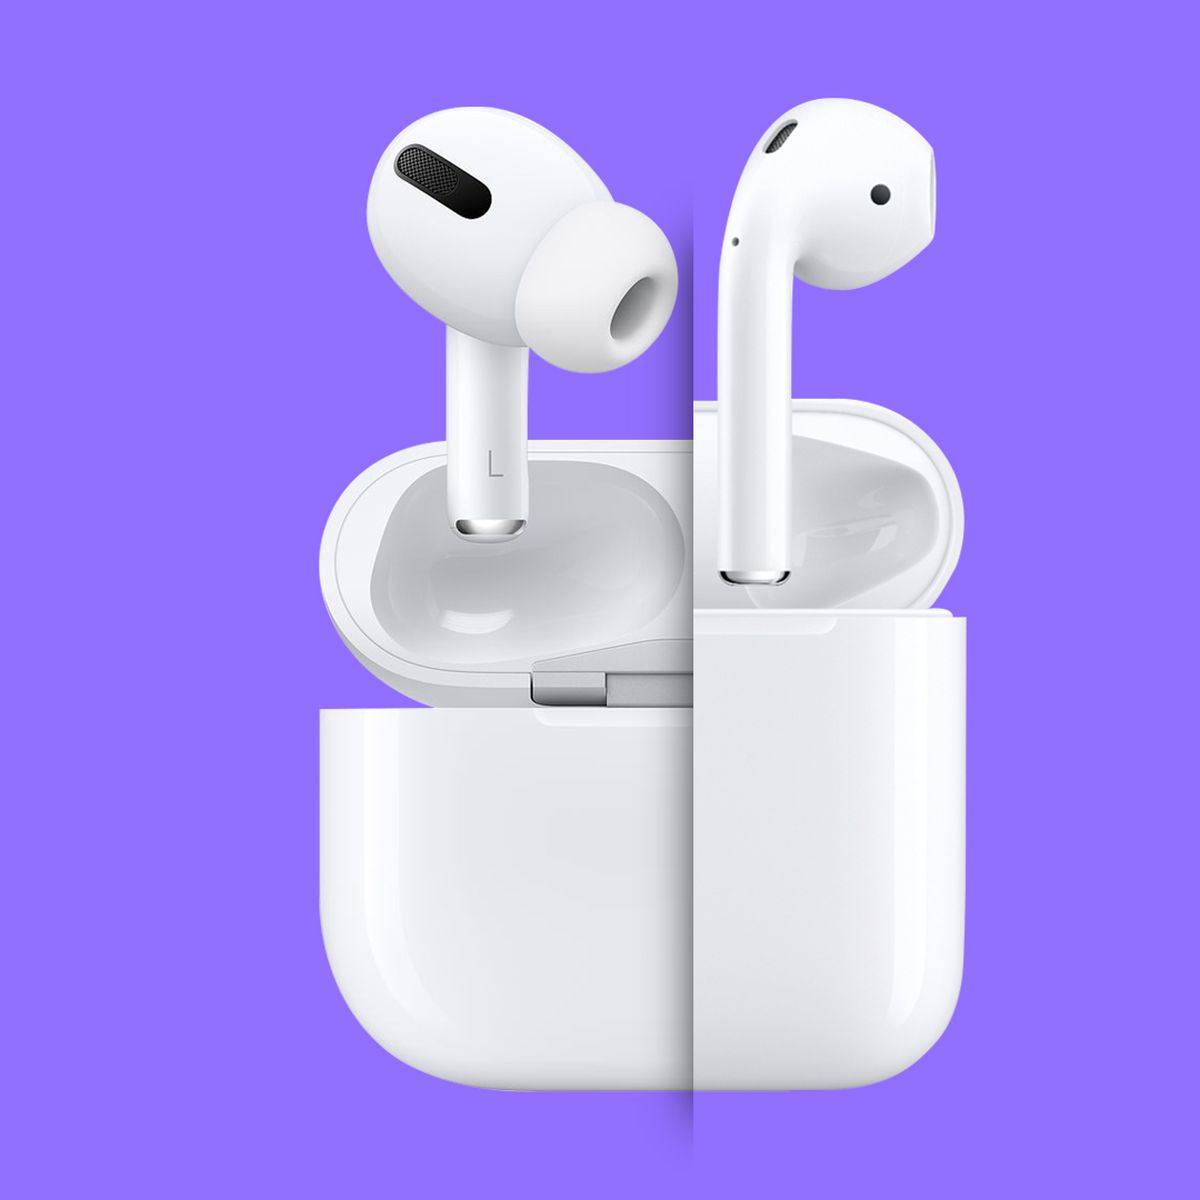 Apple's Plan to Introduce New AirPods Later Reportedly Delayed - MacRumors